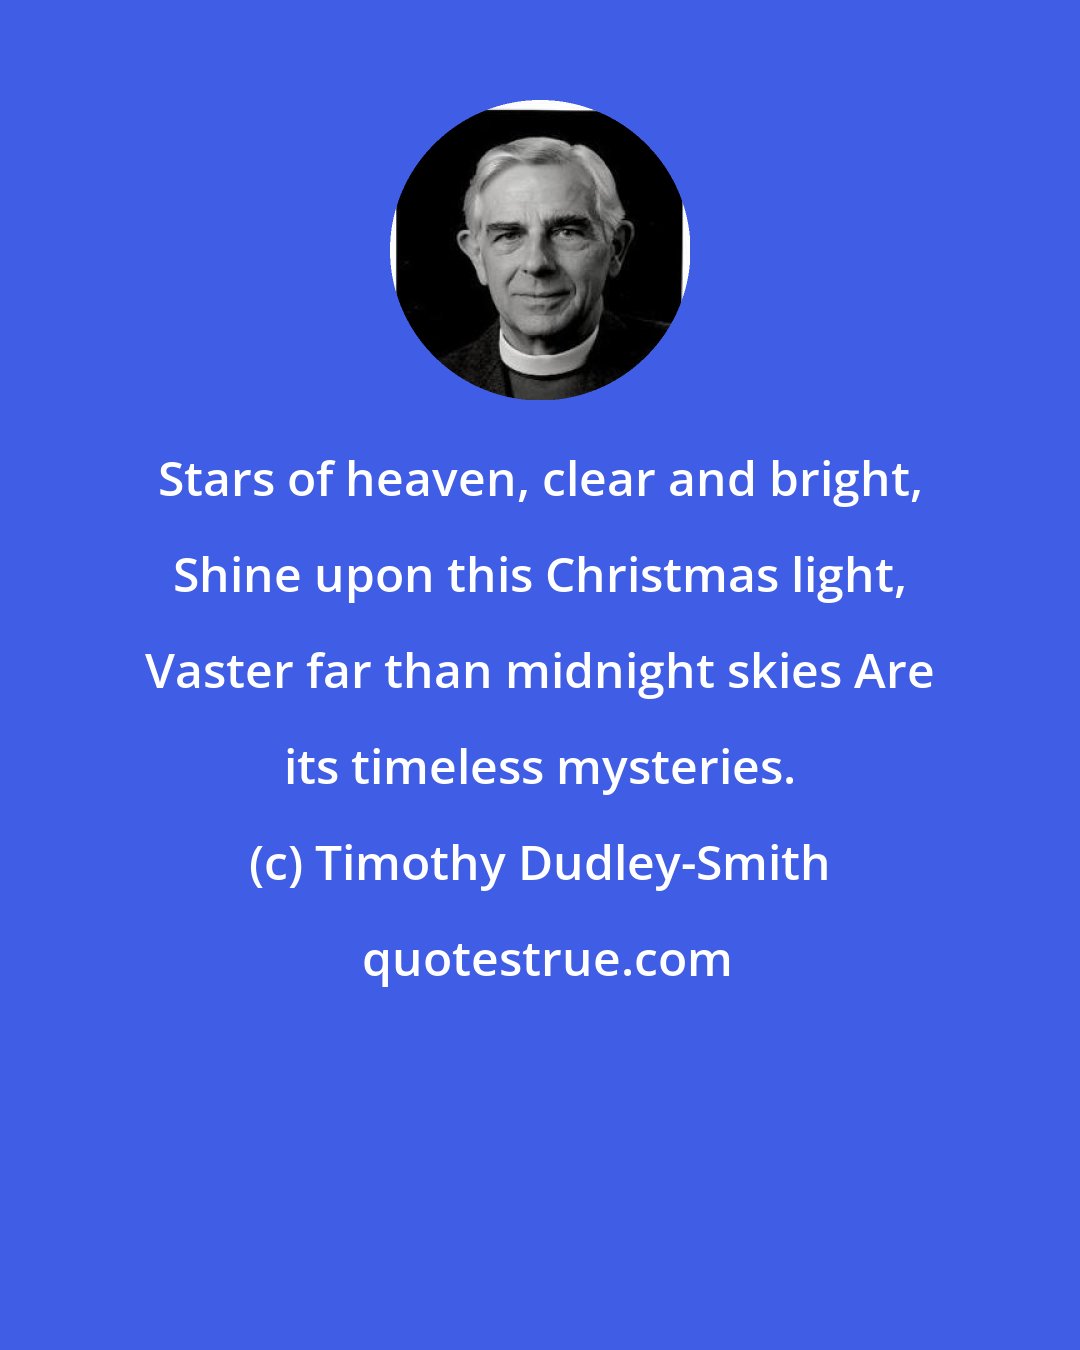 Timothy Dudley-Smith: Stars of heaven, clear and bright, Shine upon this Christmas light, Vaster far than midnight skies Are its timeless mysteries.